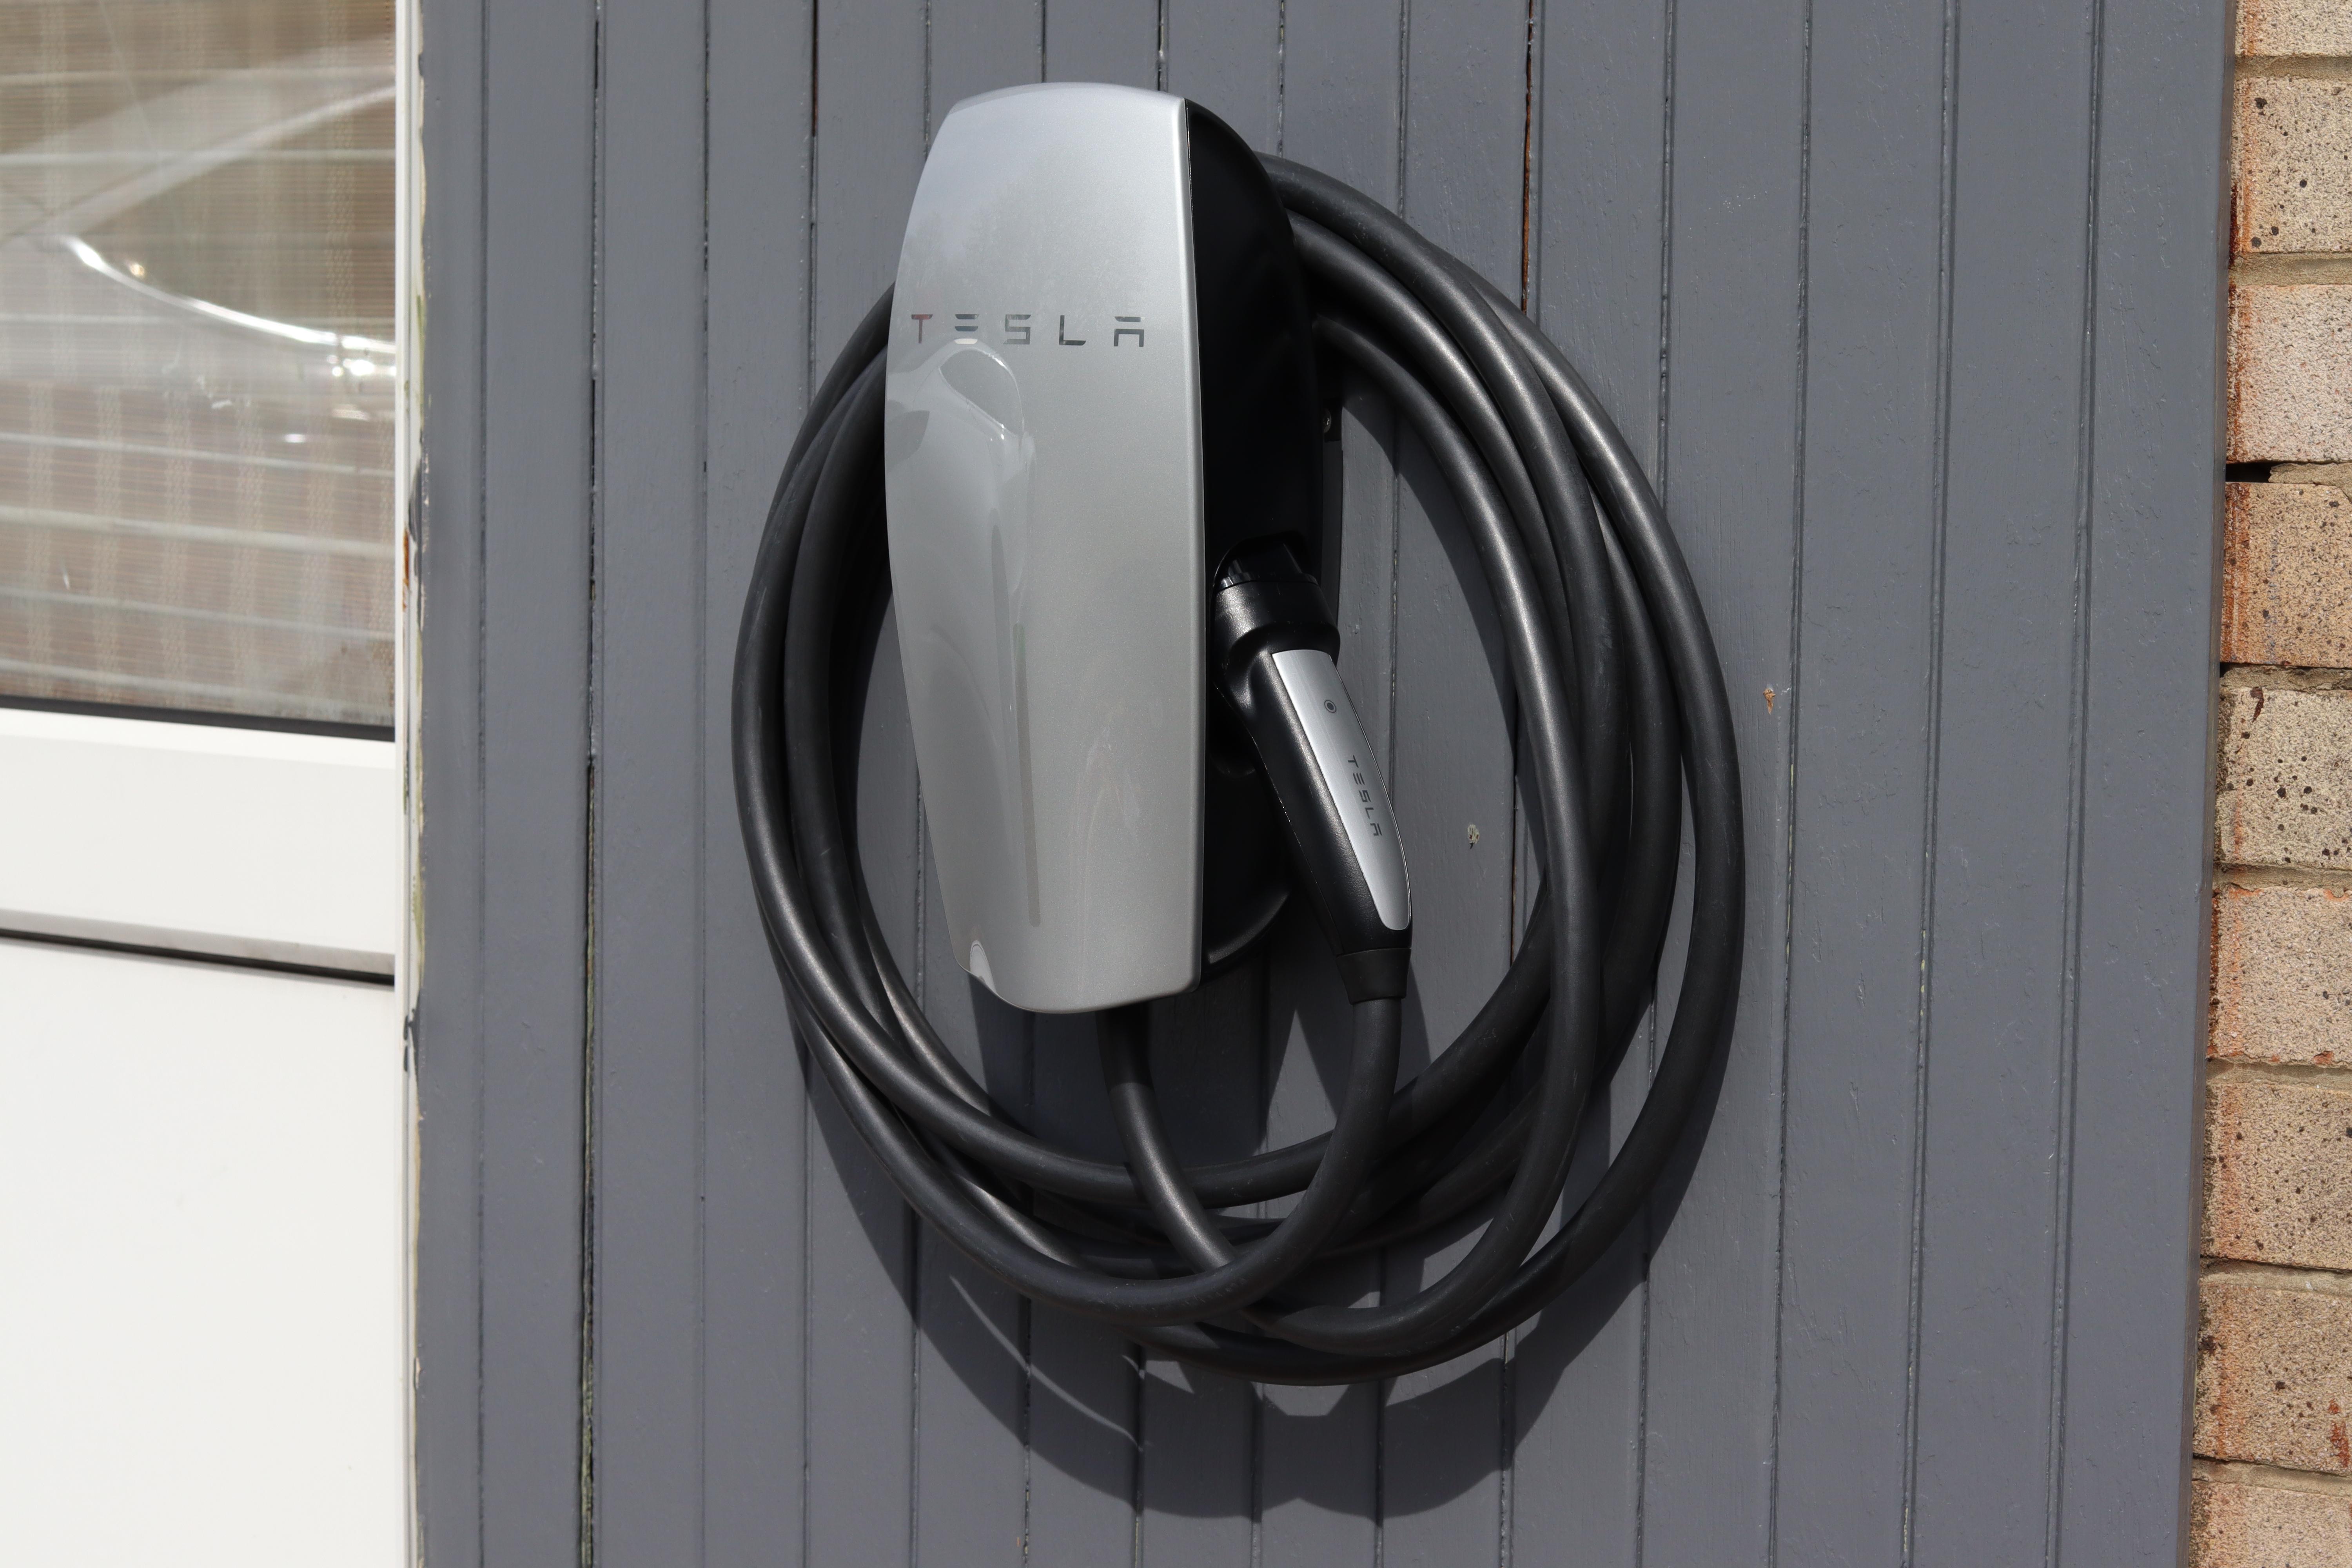 How to Install Tesla Wall Connector Gen 3 - Step By Step Guide - TESBROS  BLOG